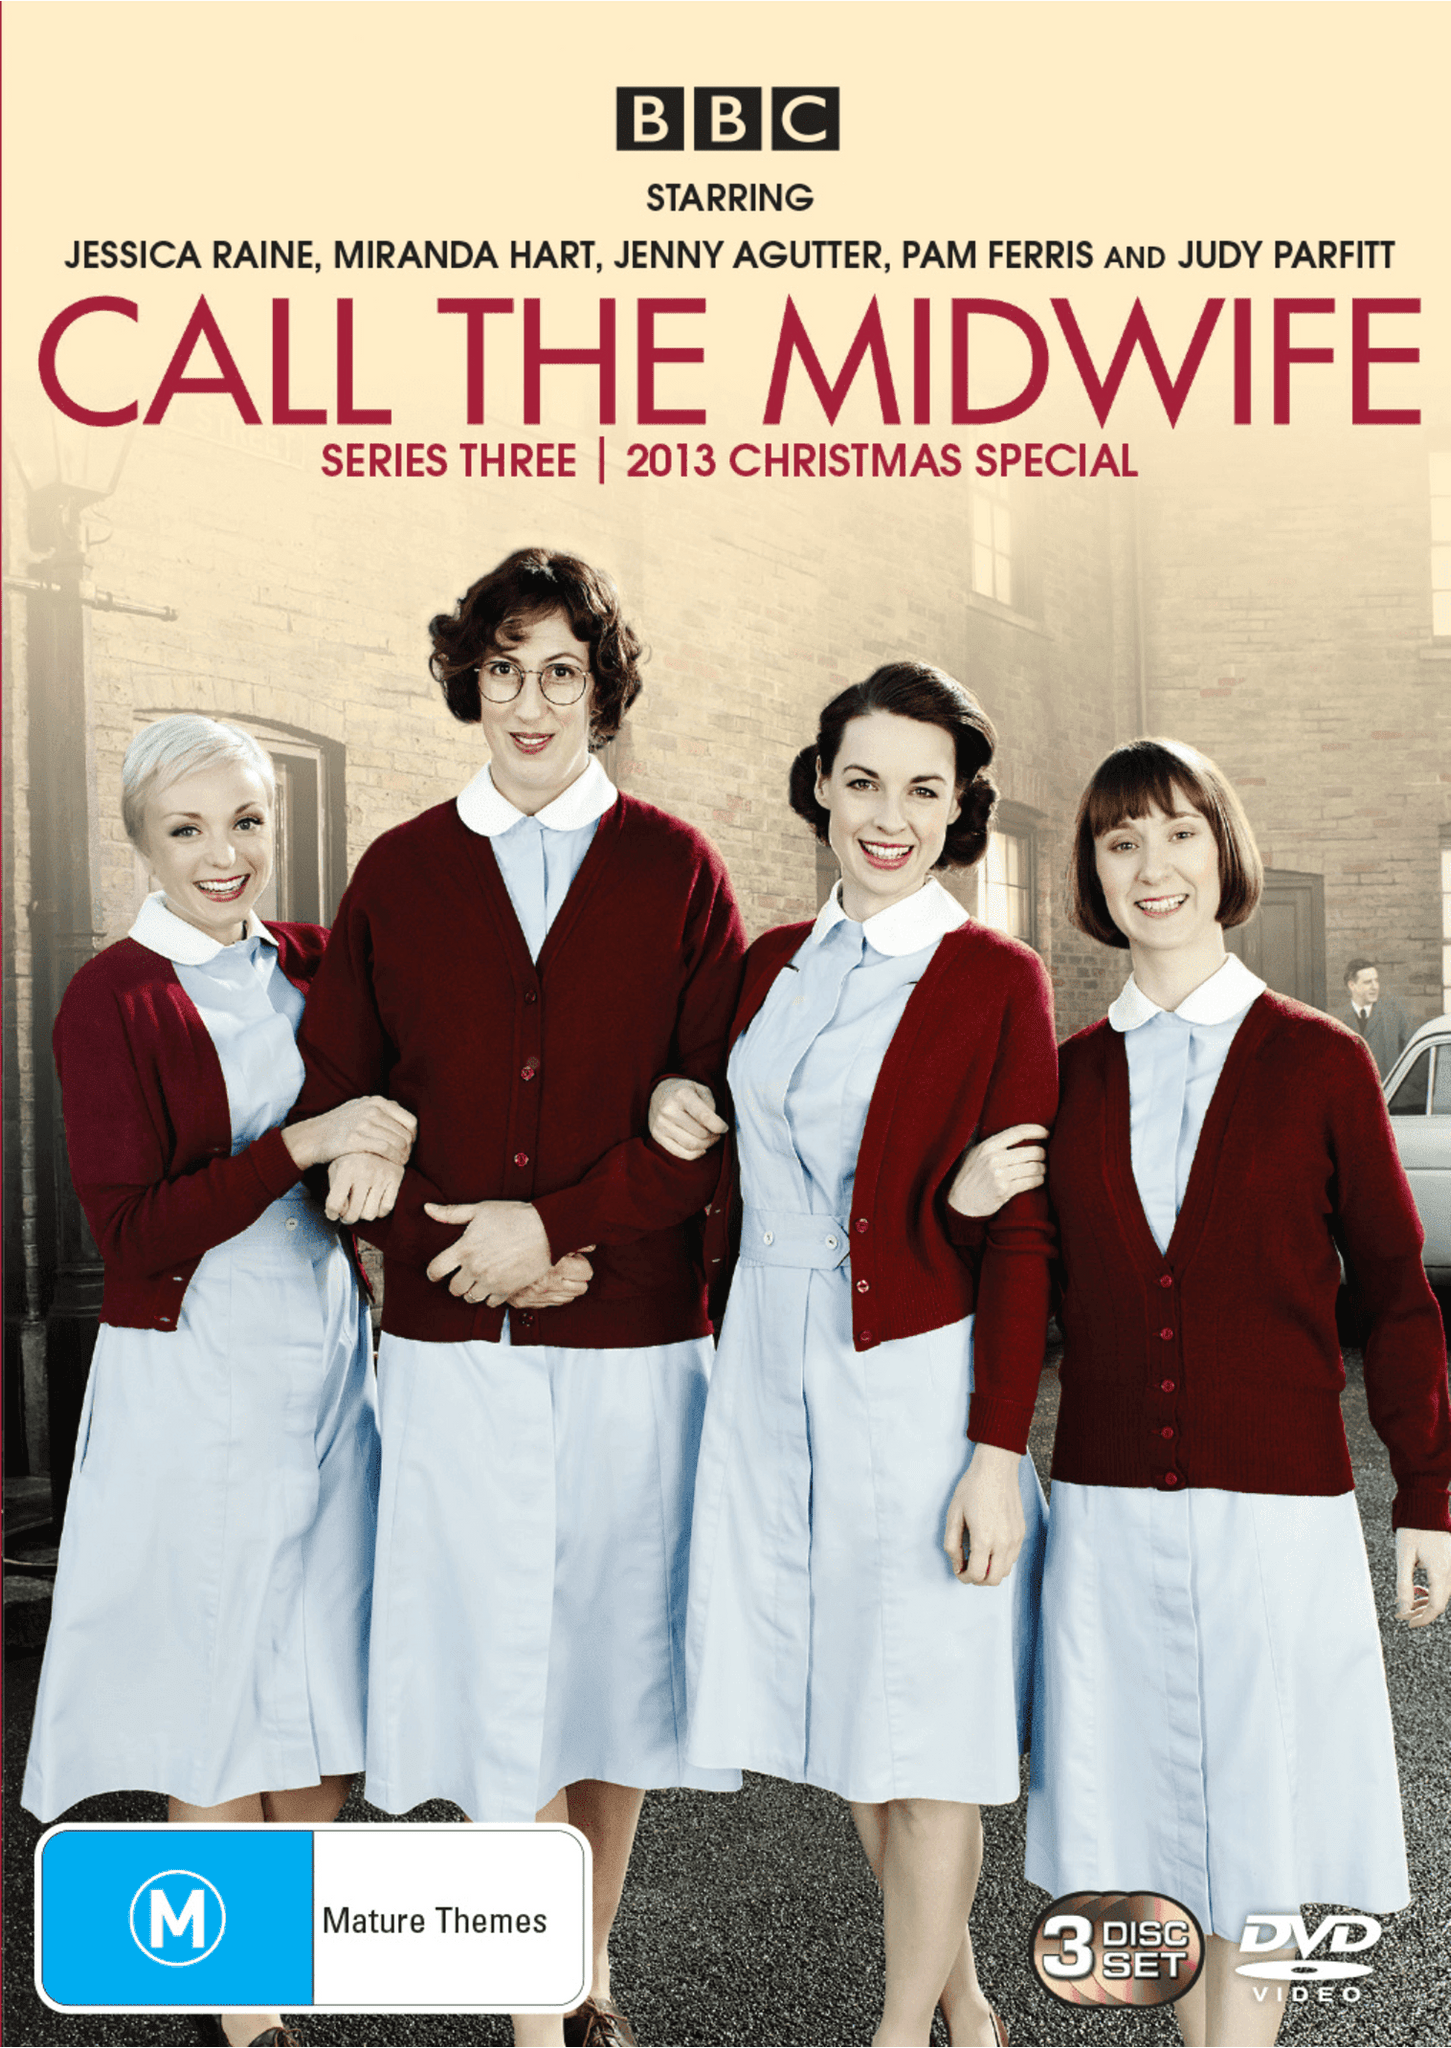 CALL THE MIDWIFE: SERIES 3